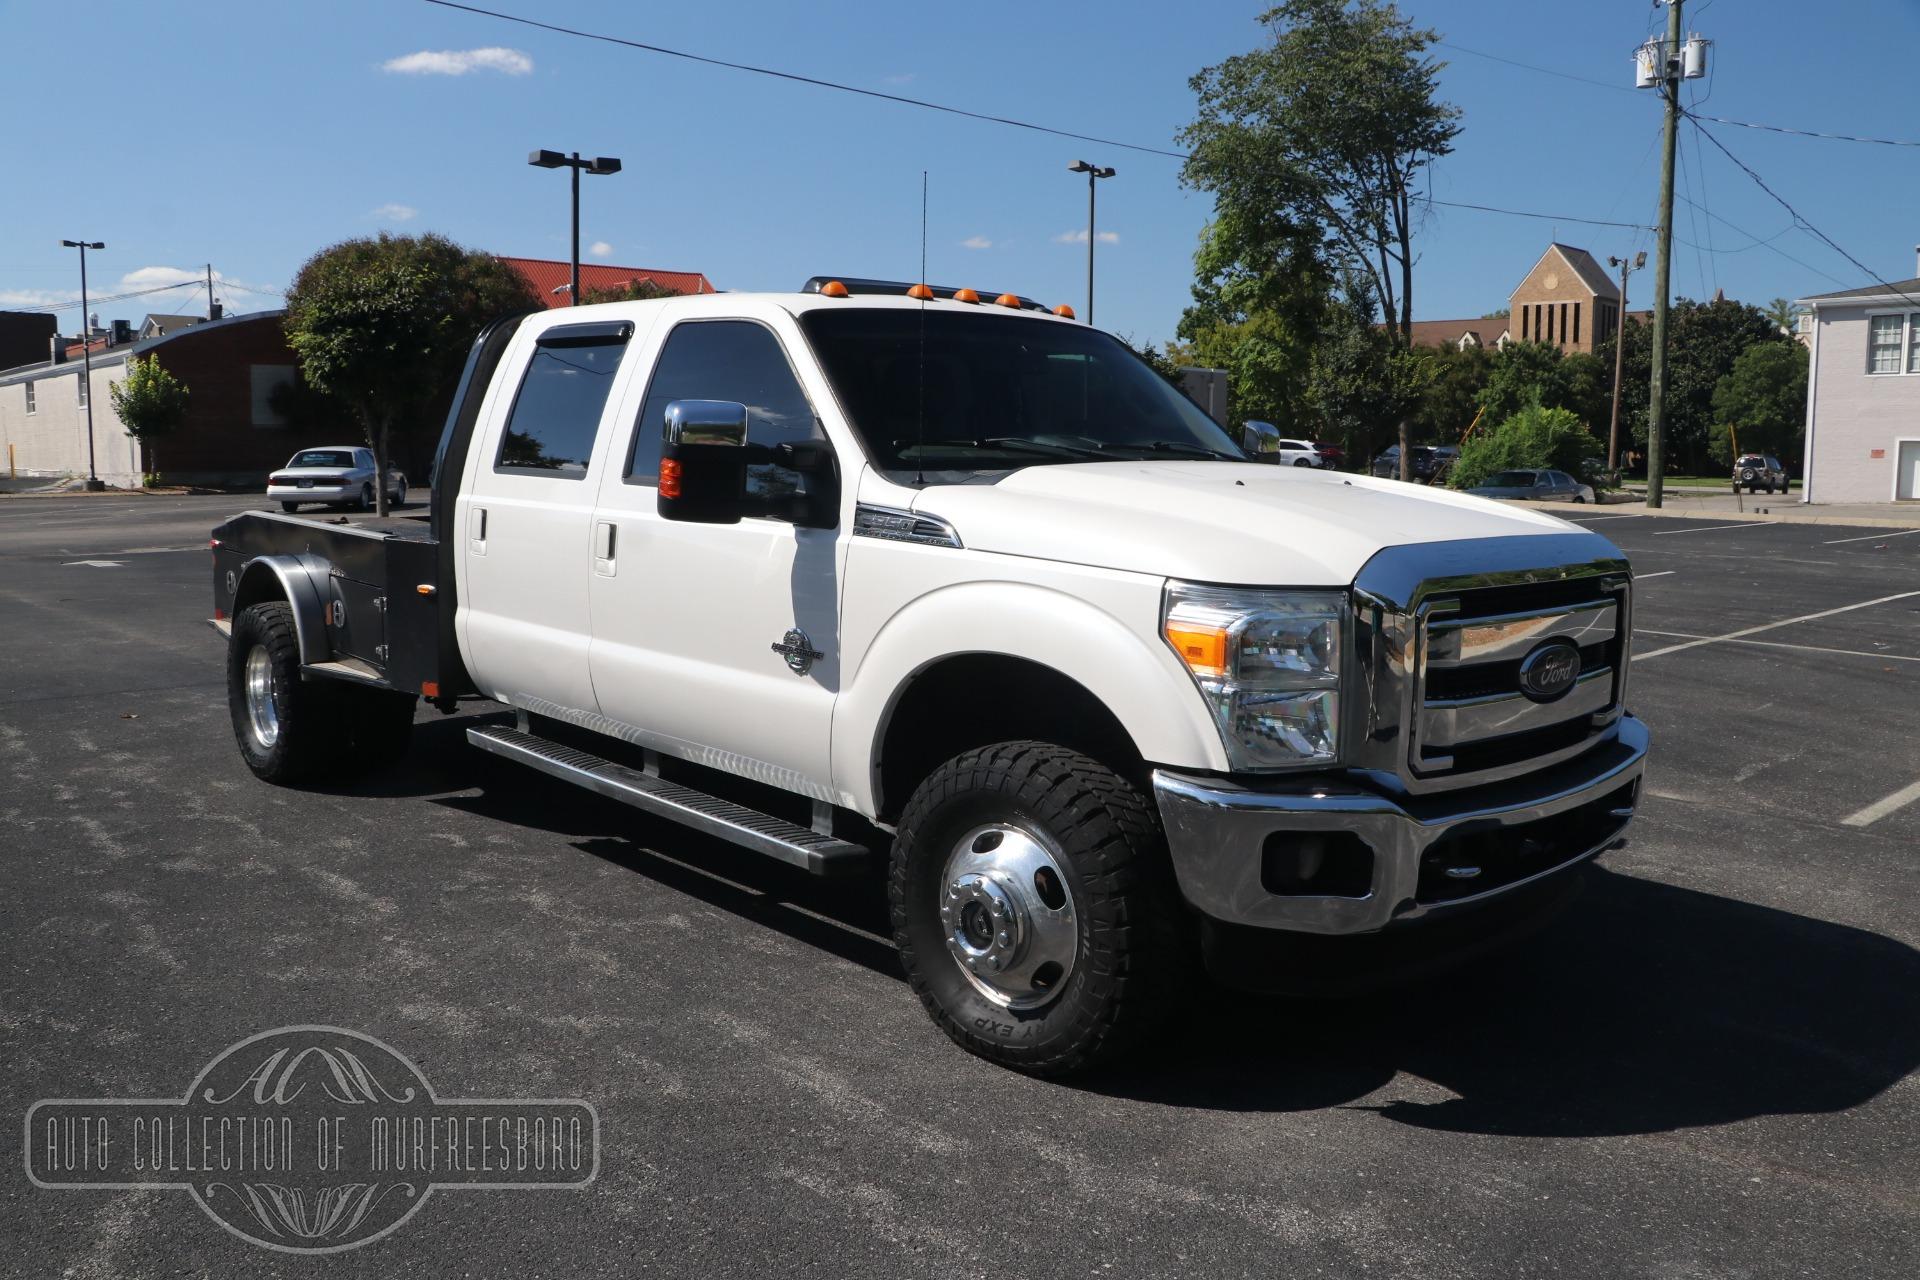 Used 2016 Ford F-350 Super Duty SUPER DUTY CREW PICKUP LARIAT 6.7L DIESEL W/LARIAT ULTIMATE PACKAGE for sale $29,820 at Auto Collection in Murfreesboro TN 37130 1